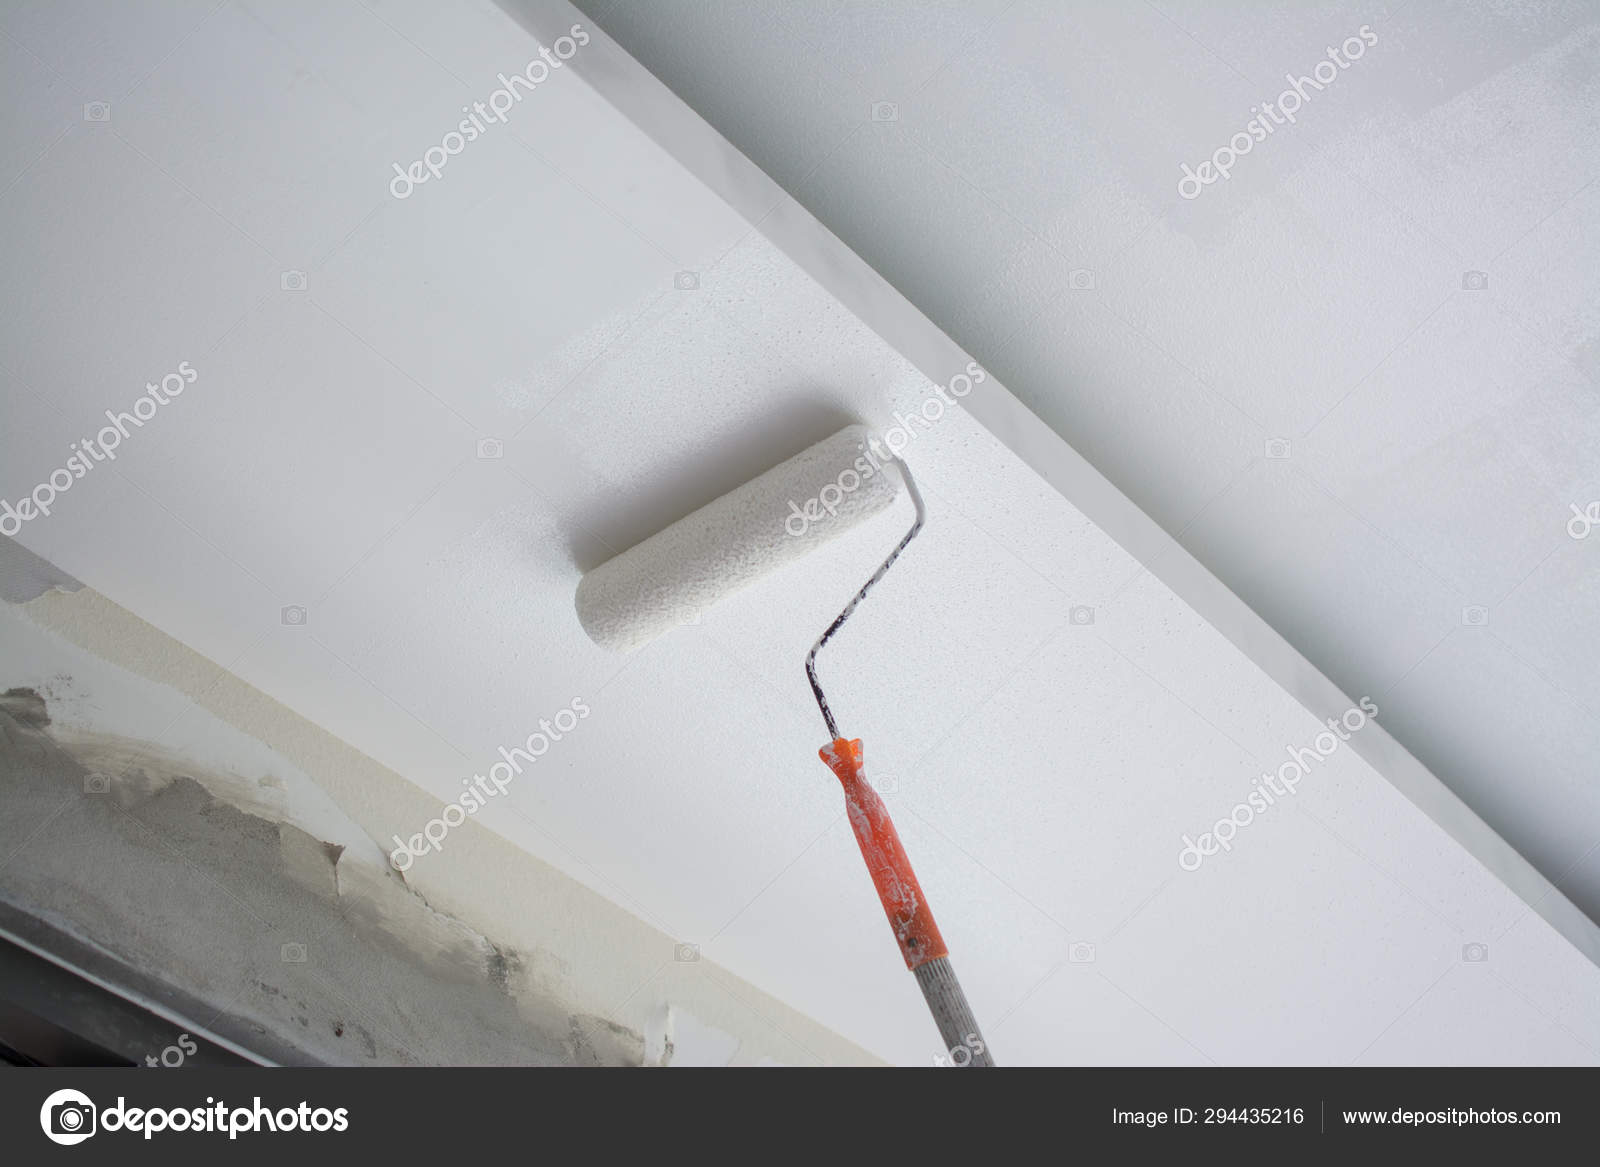 Painting A White Gypsum Plaster Ceiling With Paint Roller